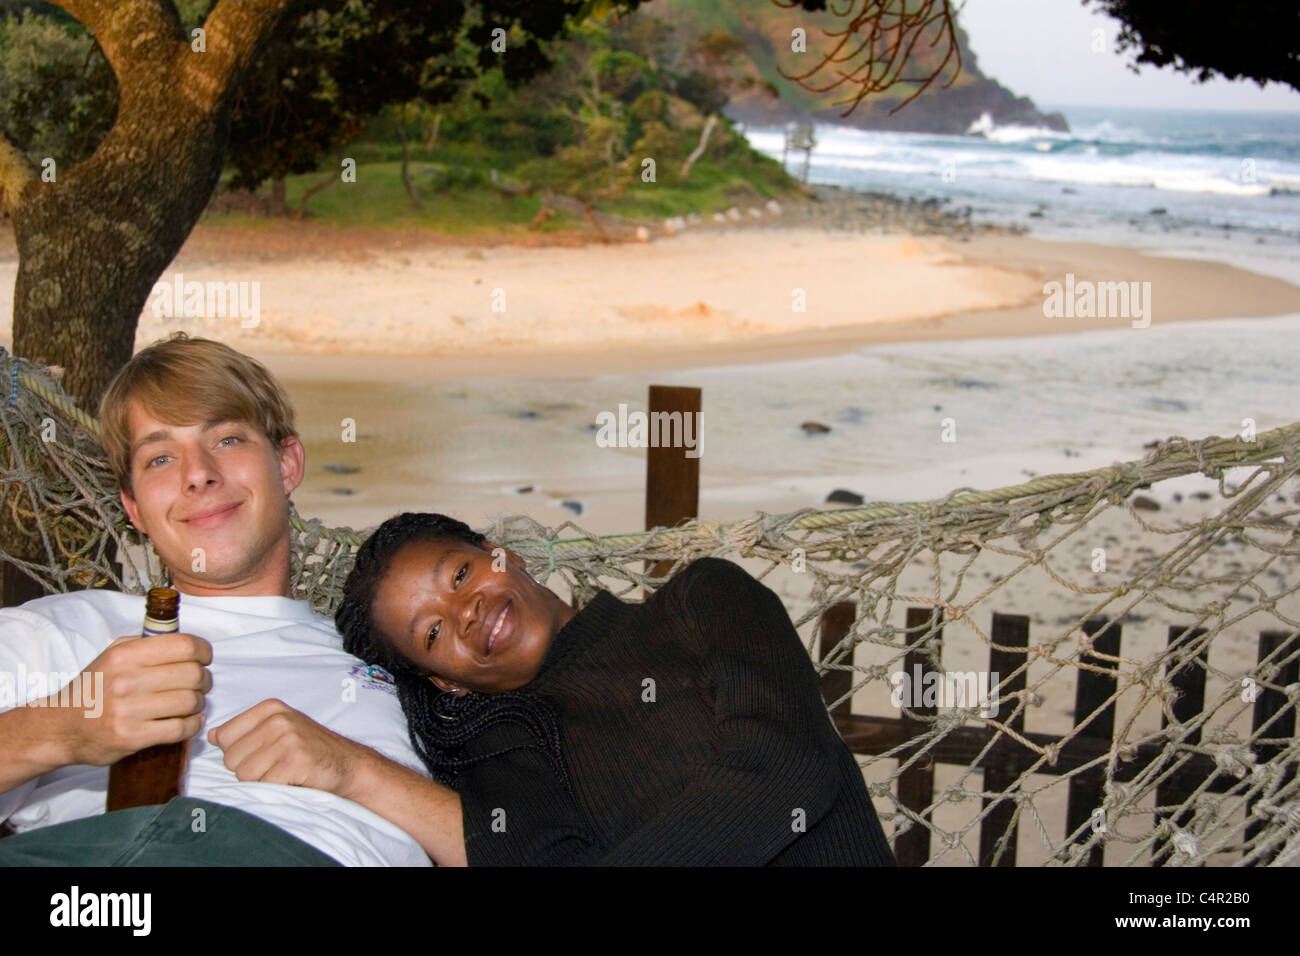 A couple relaxes in a hammock by the beach, Transkei, South Africa Stock Photo